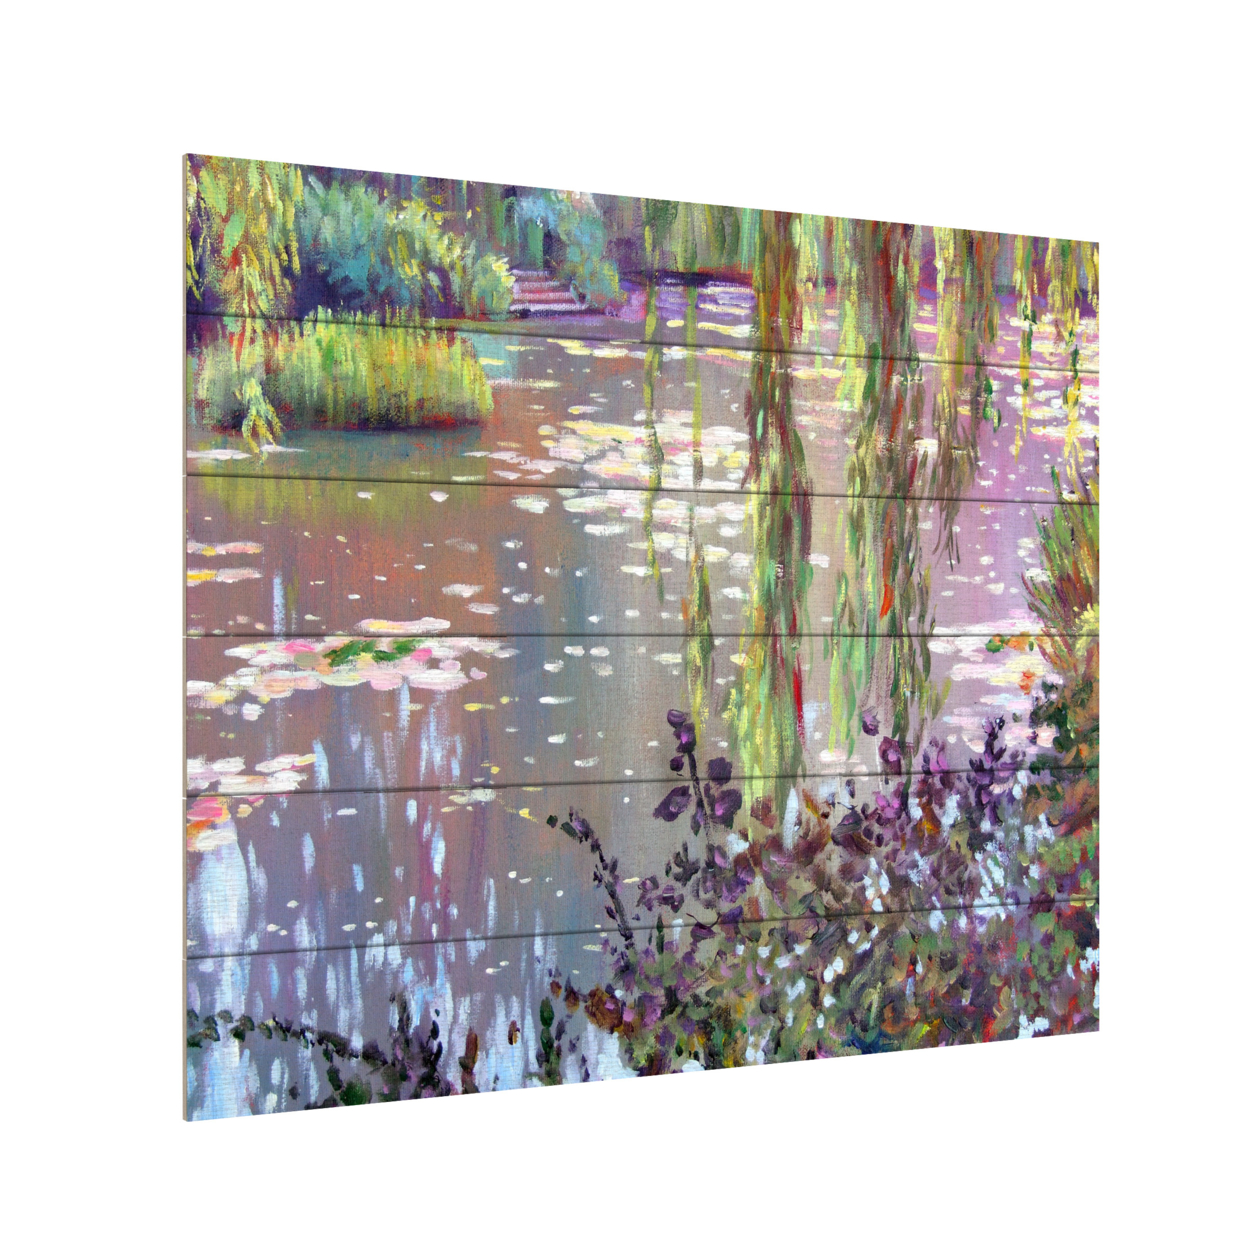 Wooden Slat Art 18 X 22 Inches Titled Homage To Monet Ready To Hang Home Decor Picture